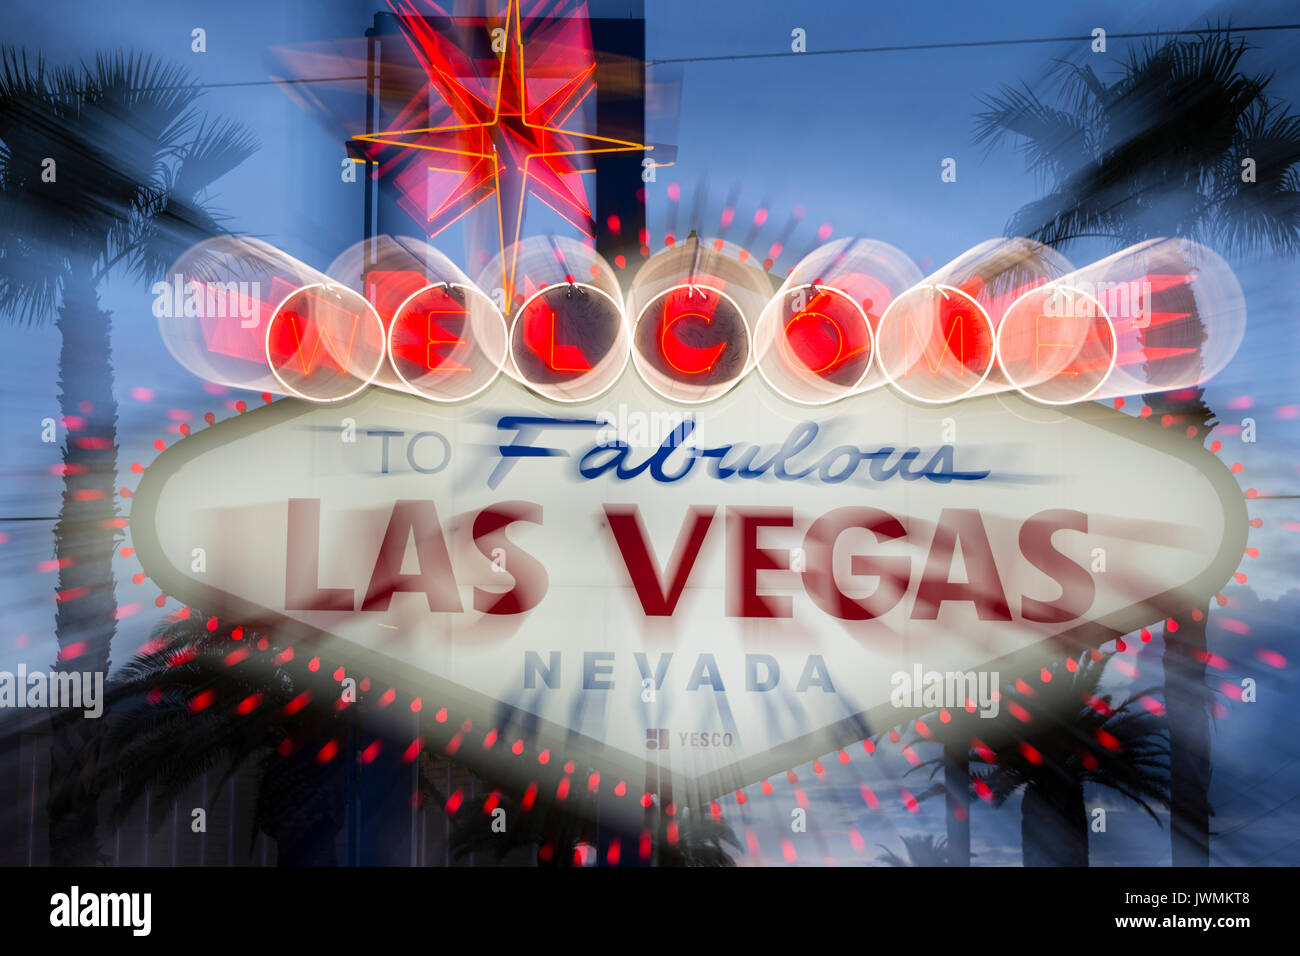 The iconic 'Welcome to Fabulous Las Vegas' neon sign greets visitors to Las Vegas traveling north on the Las Vegas strip. Stock Photo